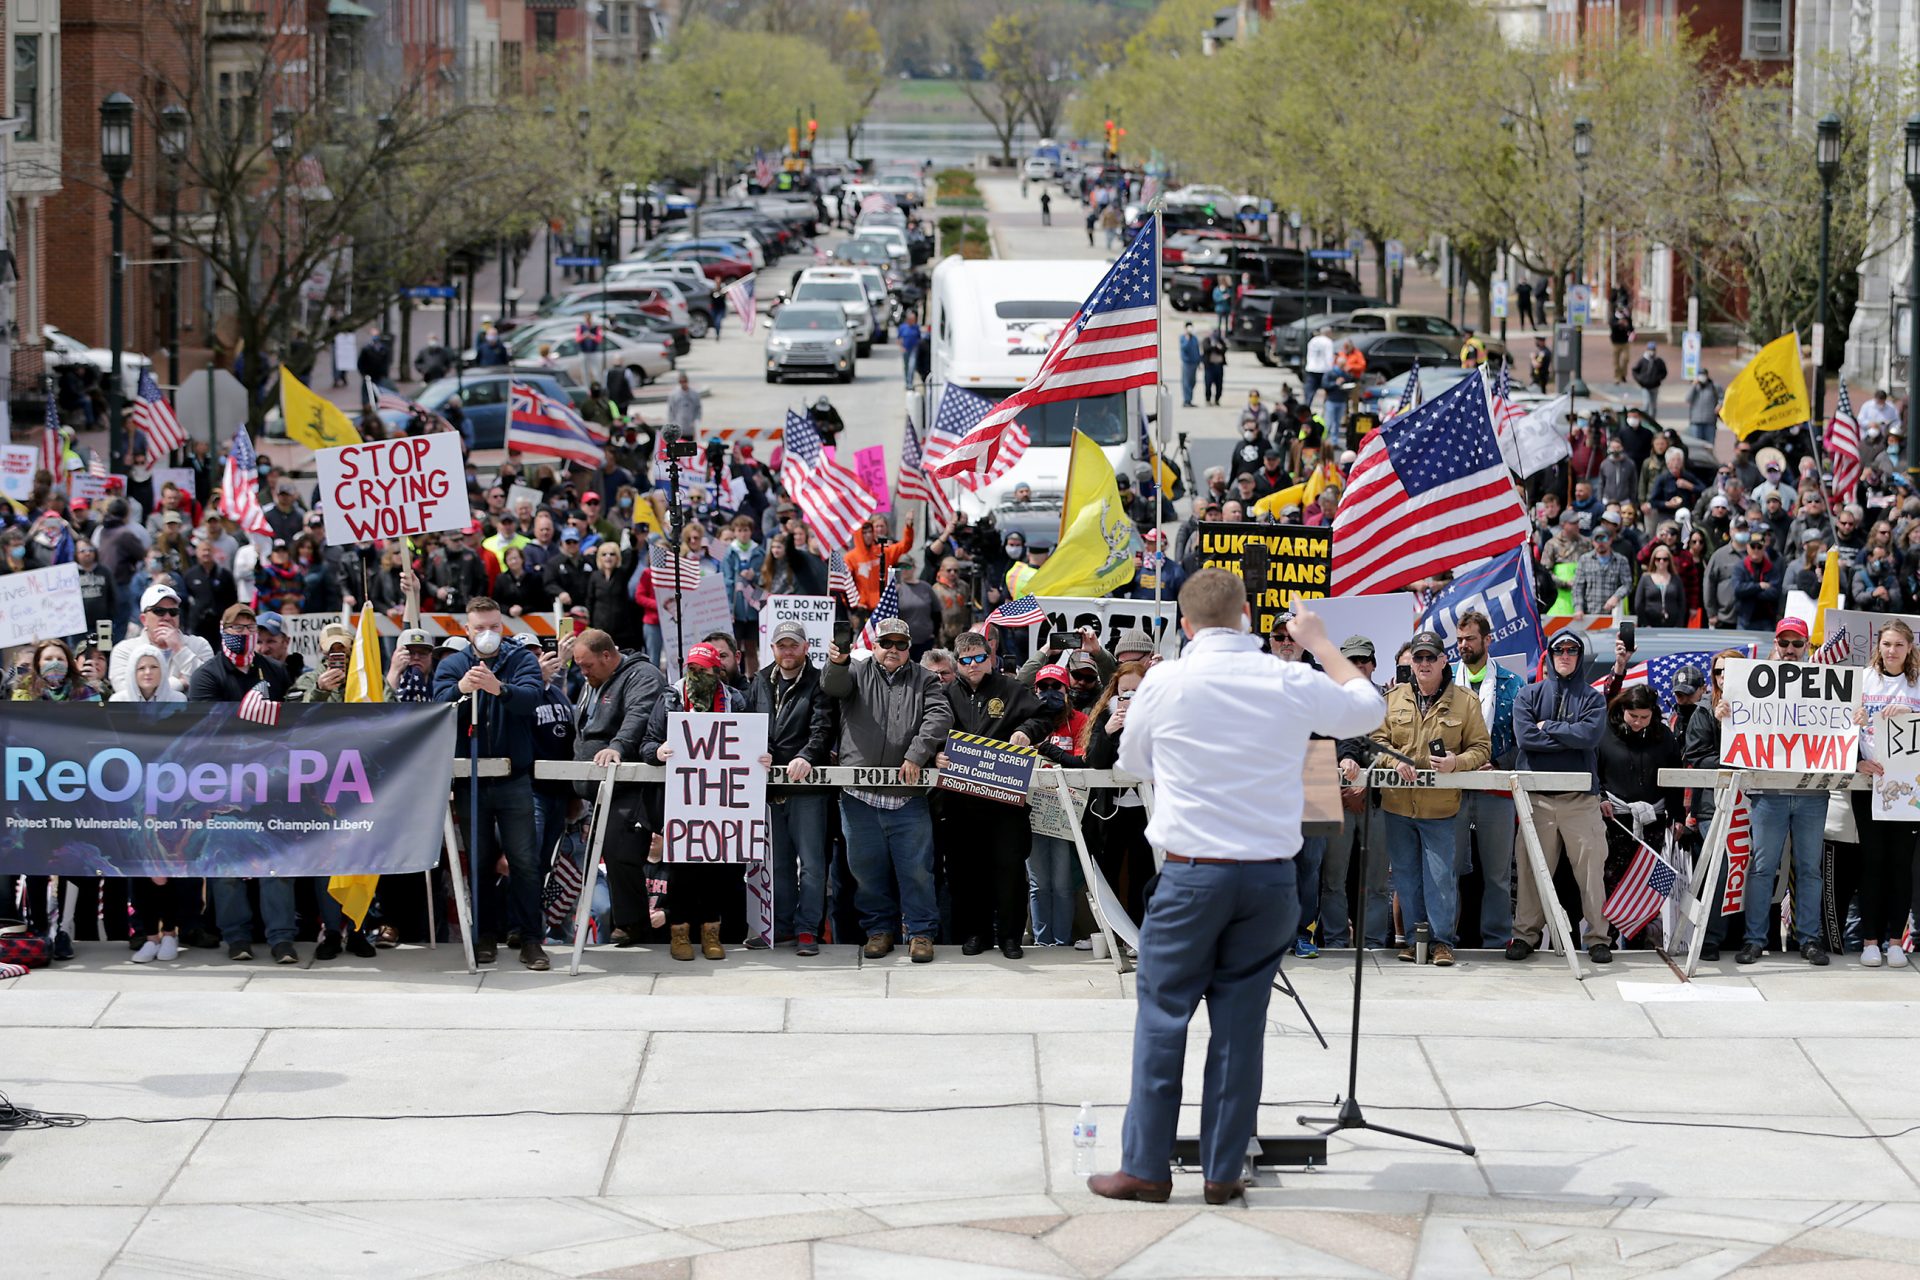 PA State Rep. Aaron Bernstine, foreground, joins protesters as they gather outside the Capital Complex in Harrisburg, PA on April 20, 2020. They are calling for Gov. Wolf to reopen up the state's economy during the coronavirus outbreak. Rep. Bernstine is supporting the reopening of businesses.

 DAVID MAIALETTI / Philadelphia Inquirer